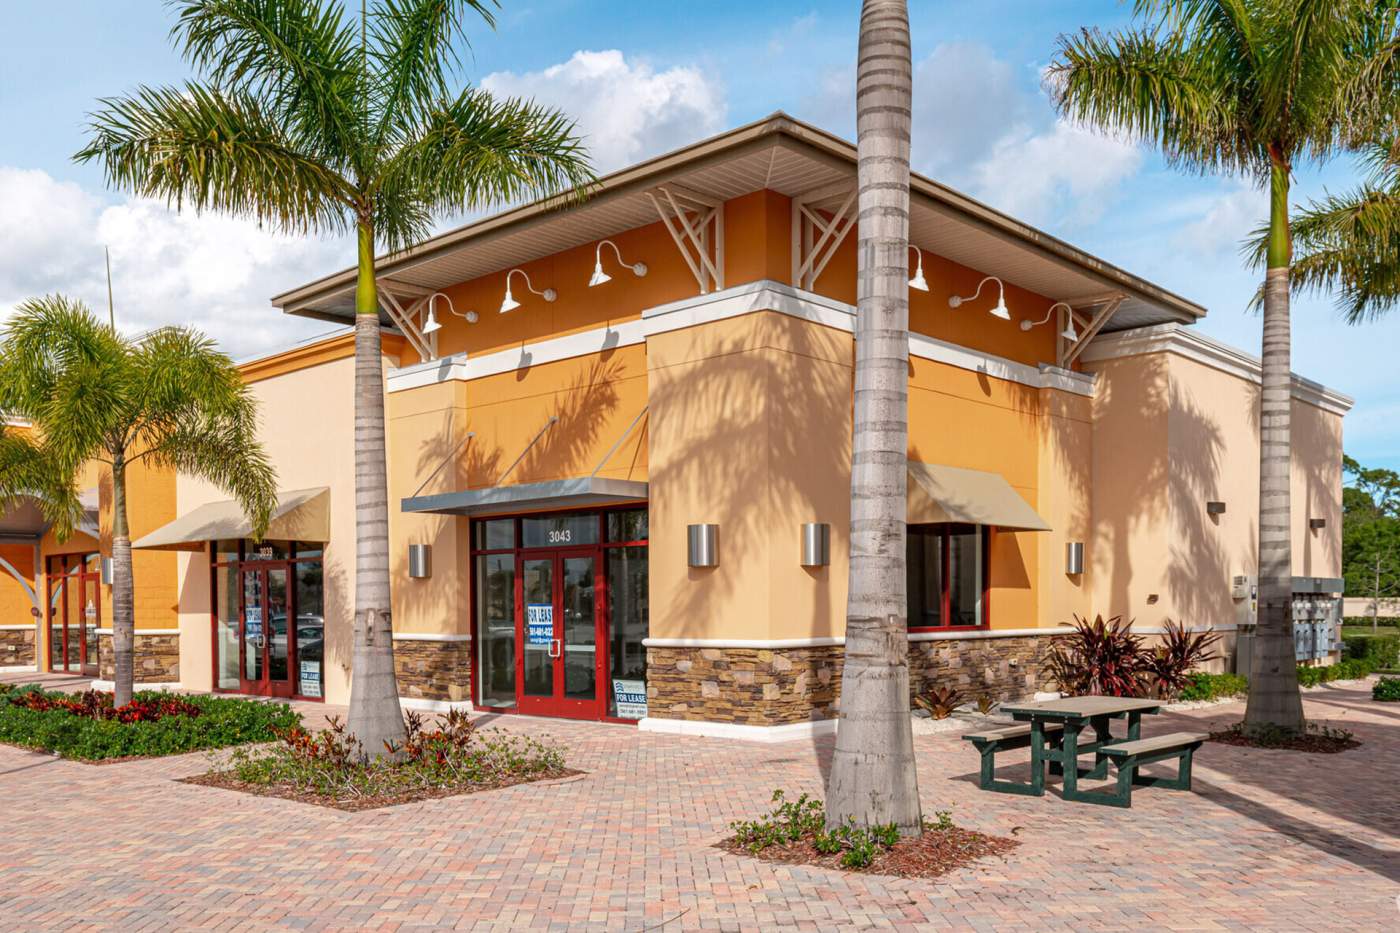 Sympatico Plaza 3045  SW  Port  St  Lucie  Blvd  Port  Saint  Lucie  FL- New  Retail  Spaces with Beautiful Landscaping